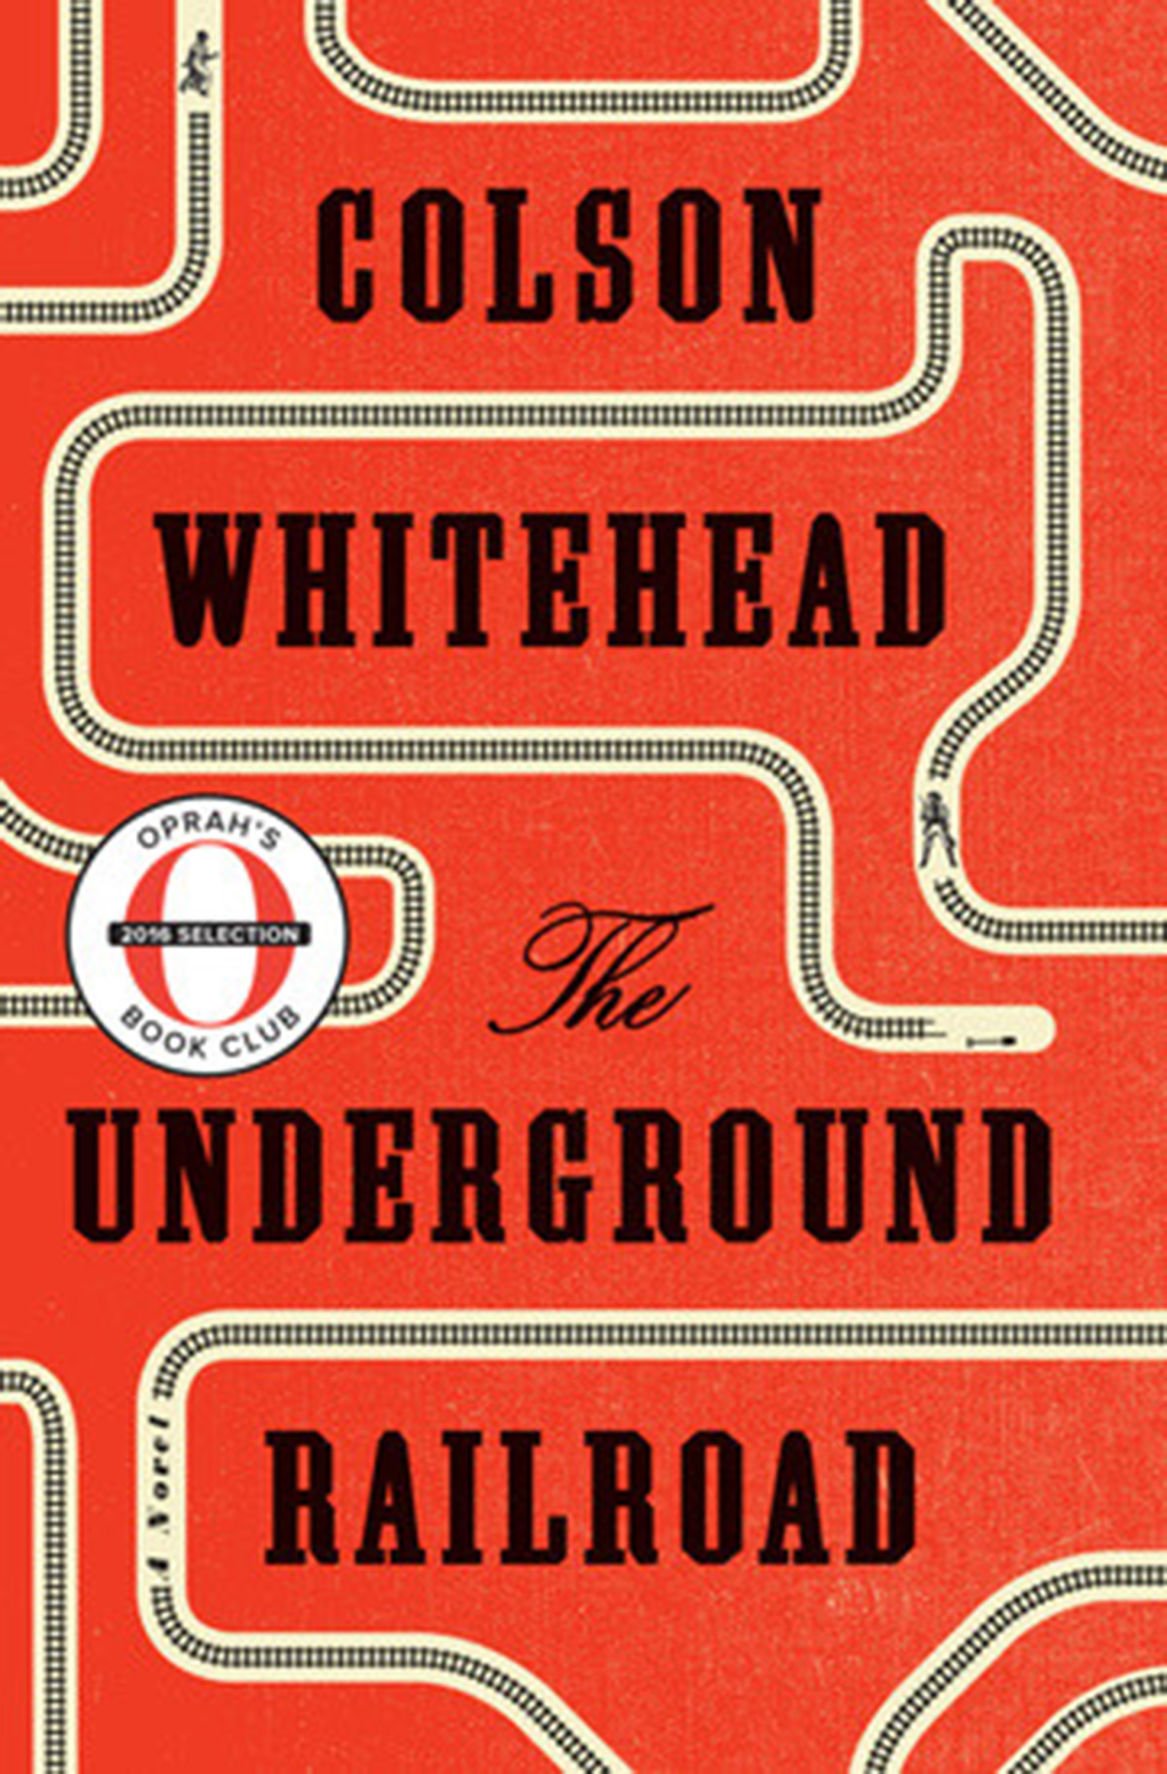 REVIEW: Could Whitehead’s “The Underground Railroad” be the book of the ...